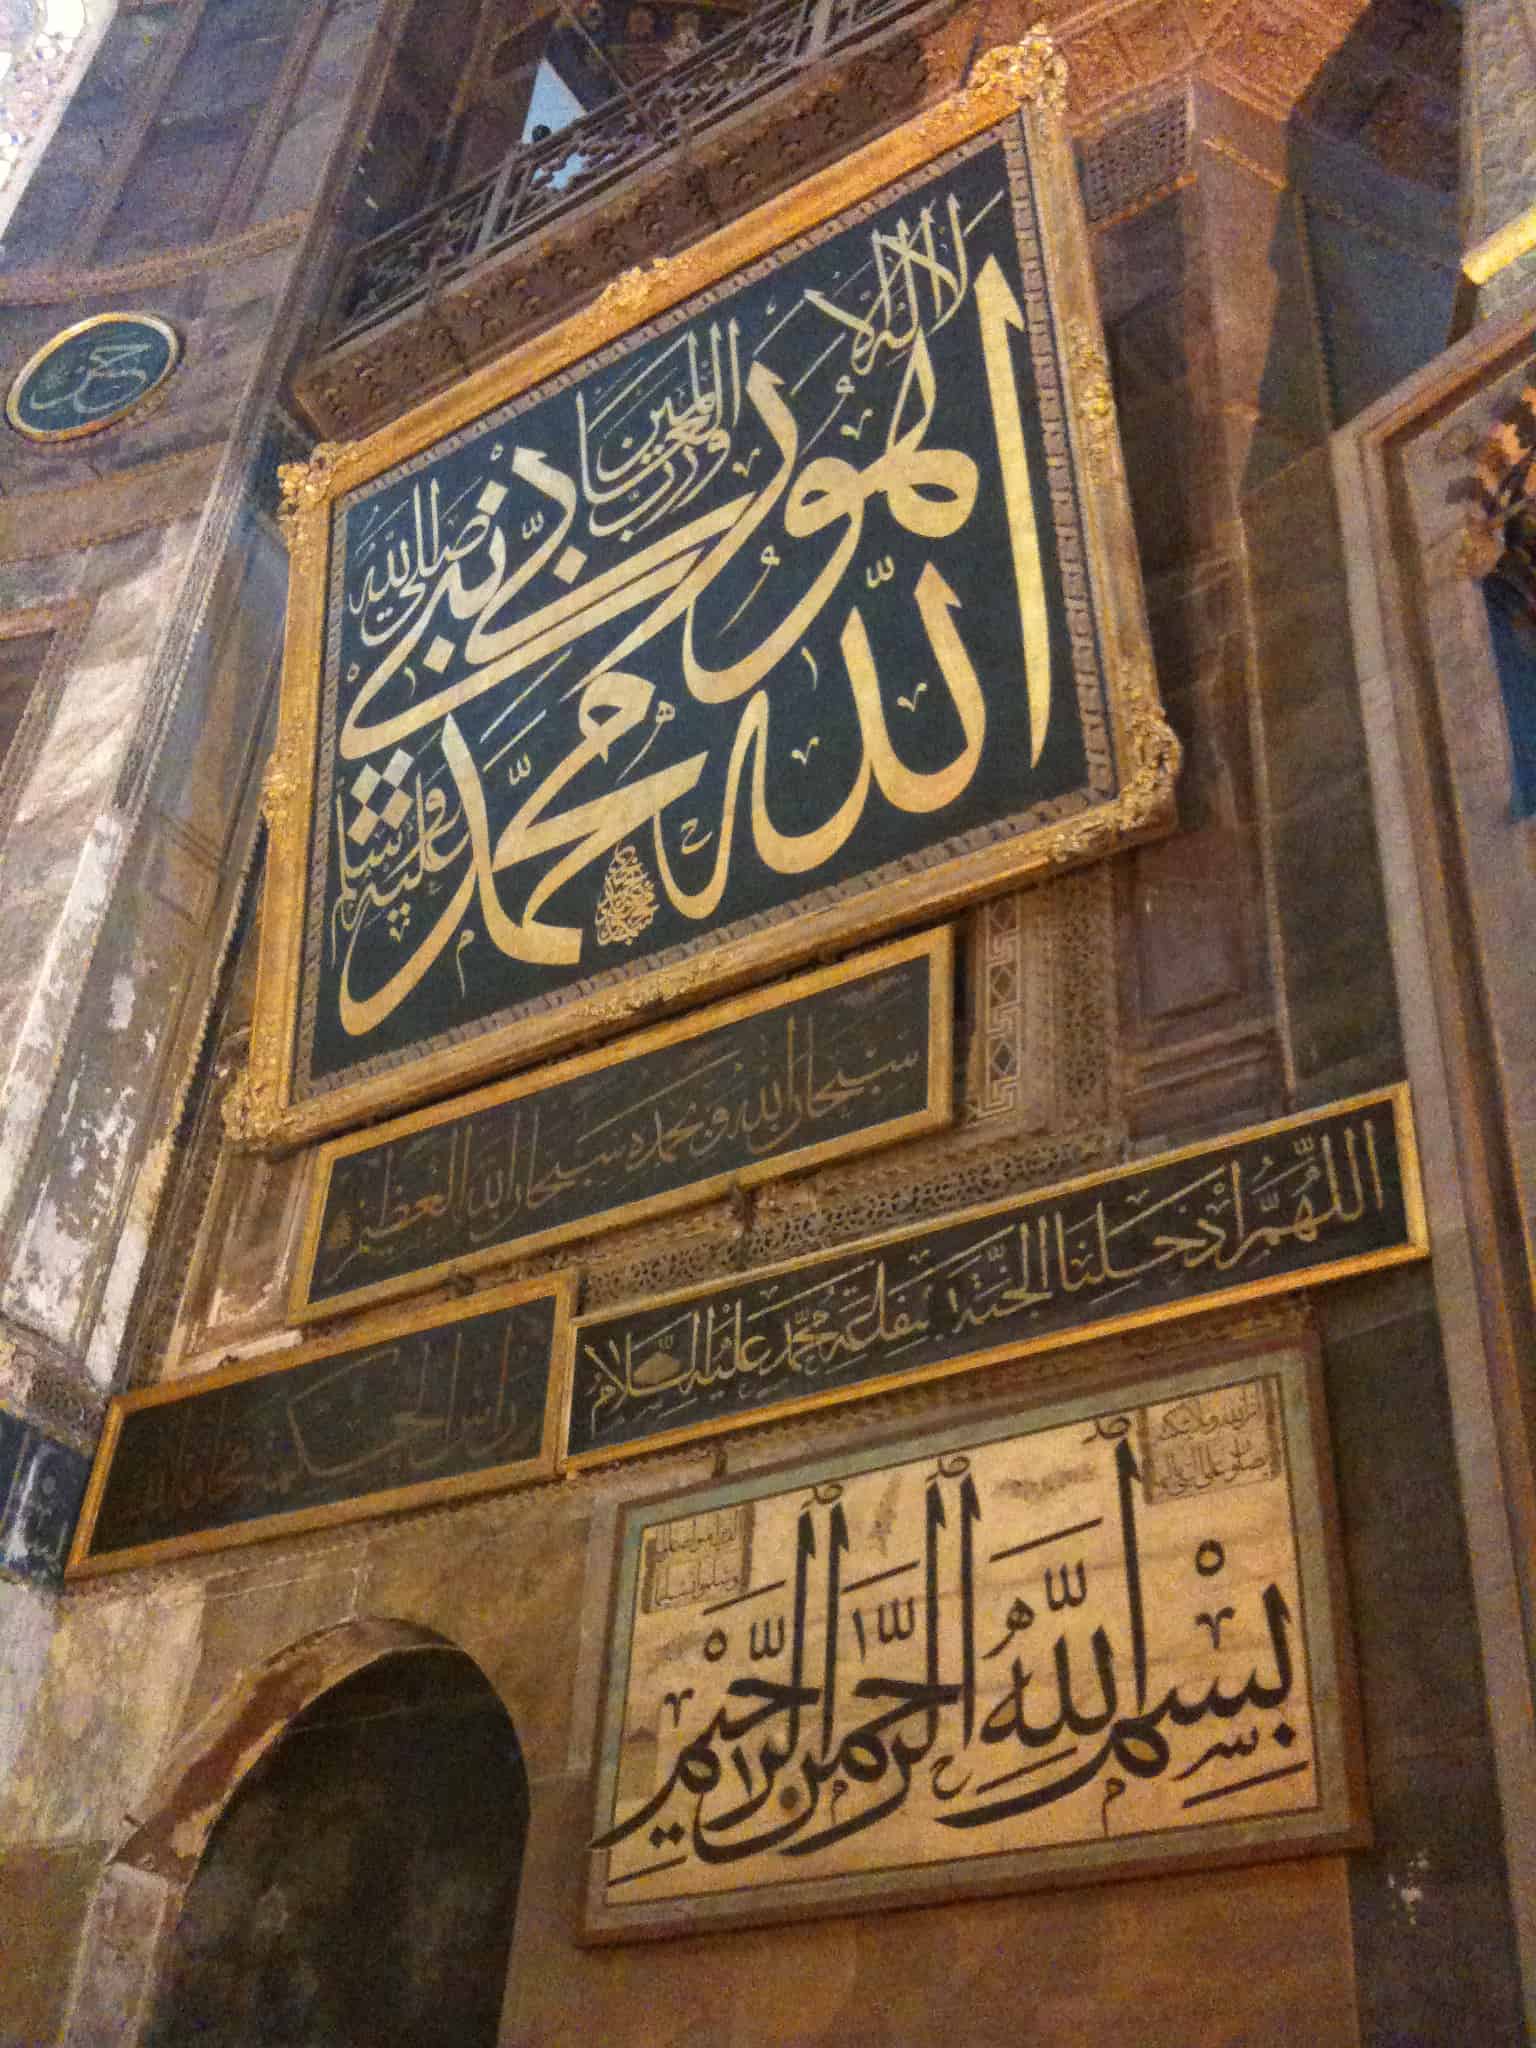 Calligraphic panels by the Sultans at Hagia Sophia in Istanbul, Turkey